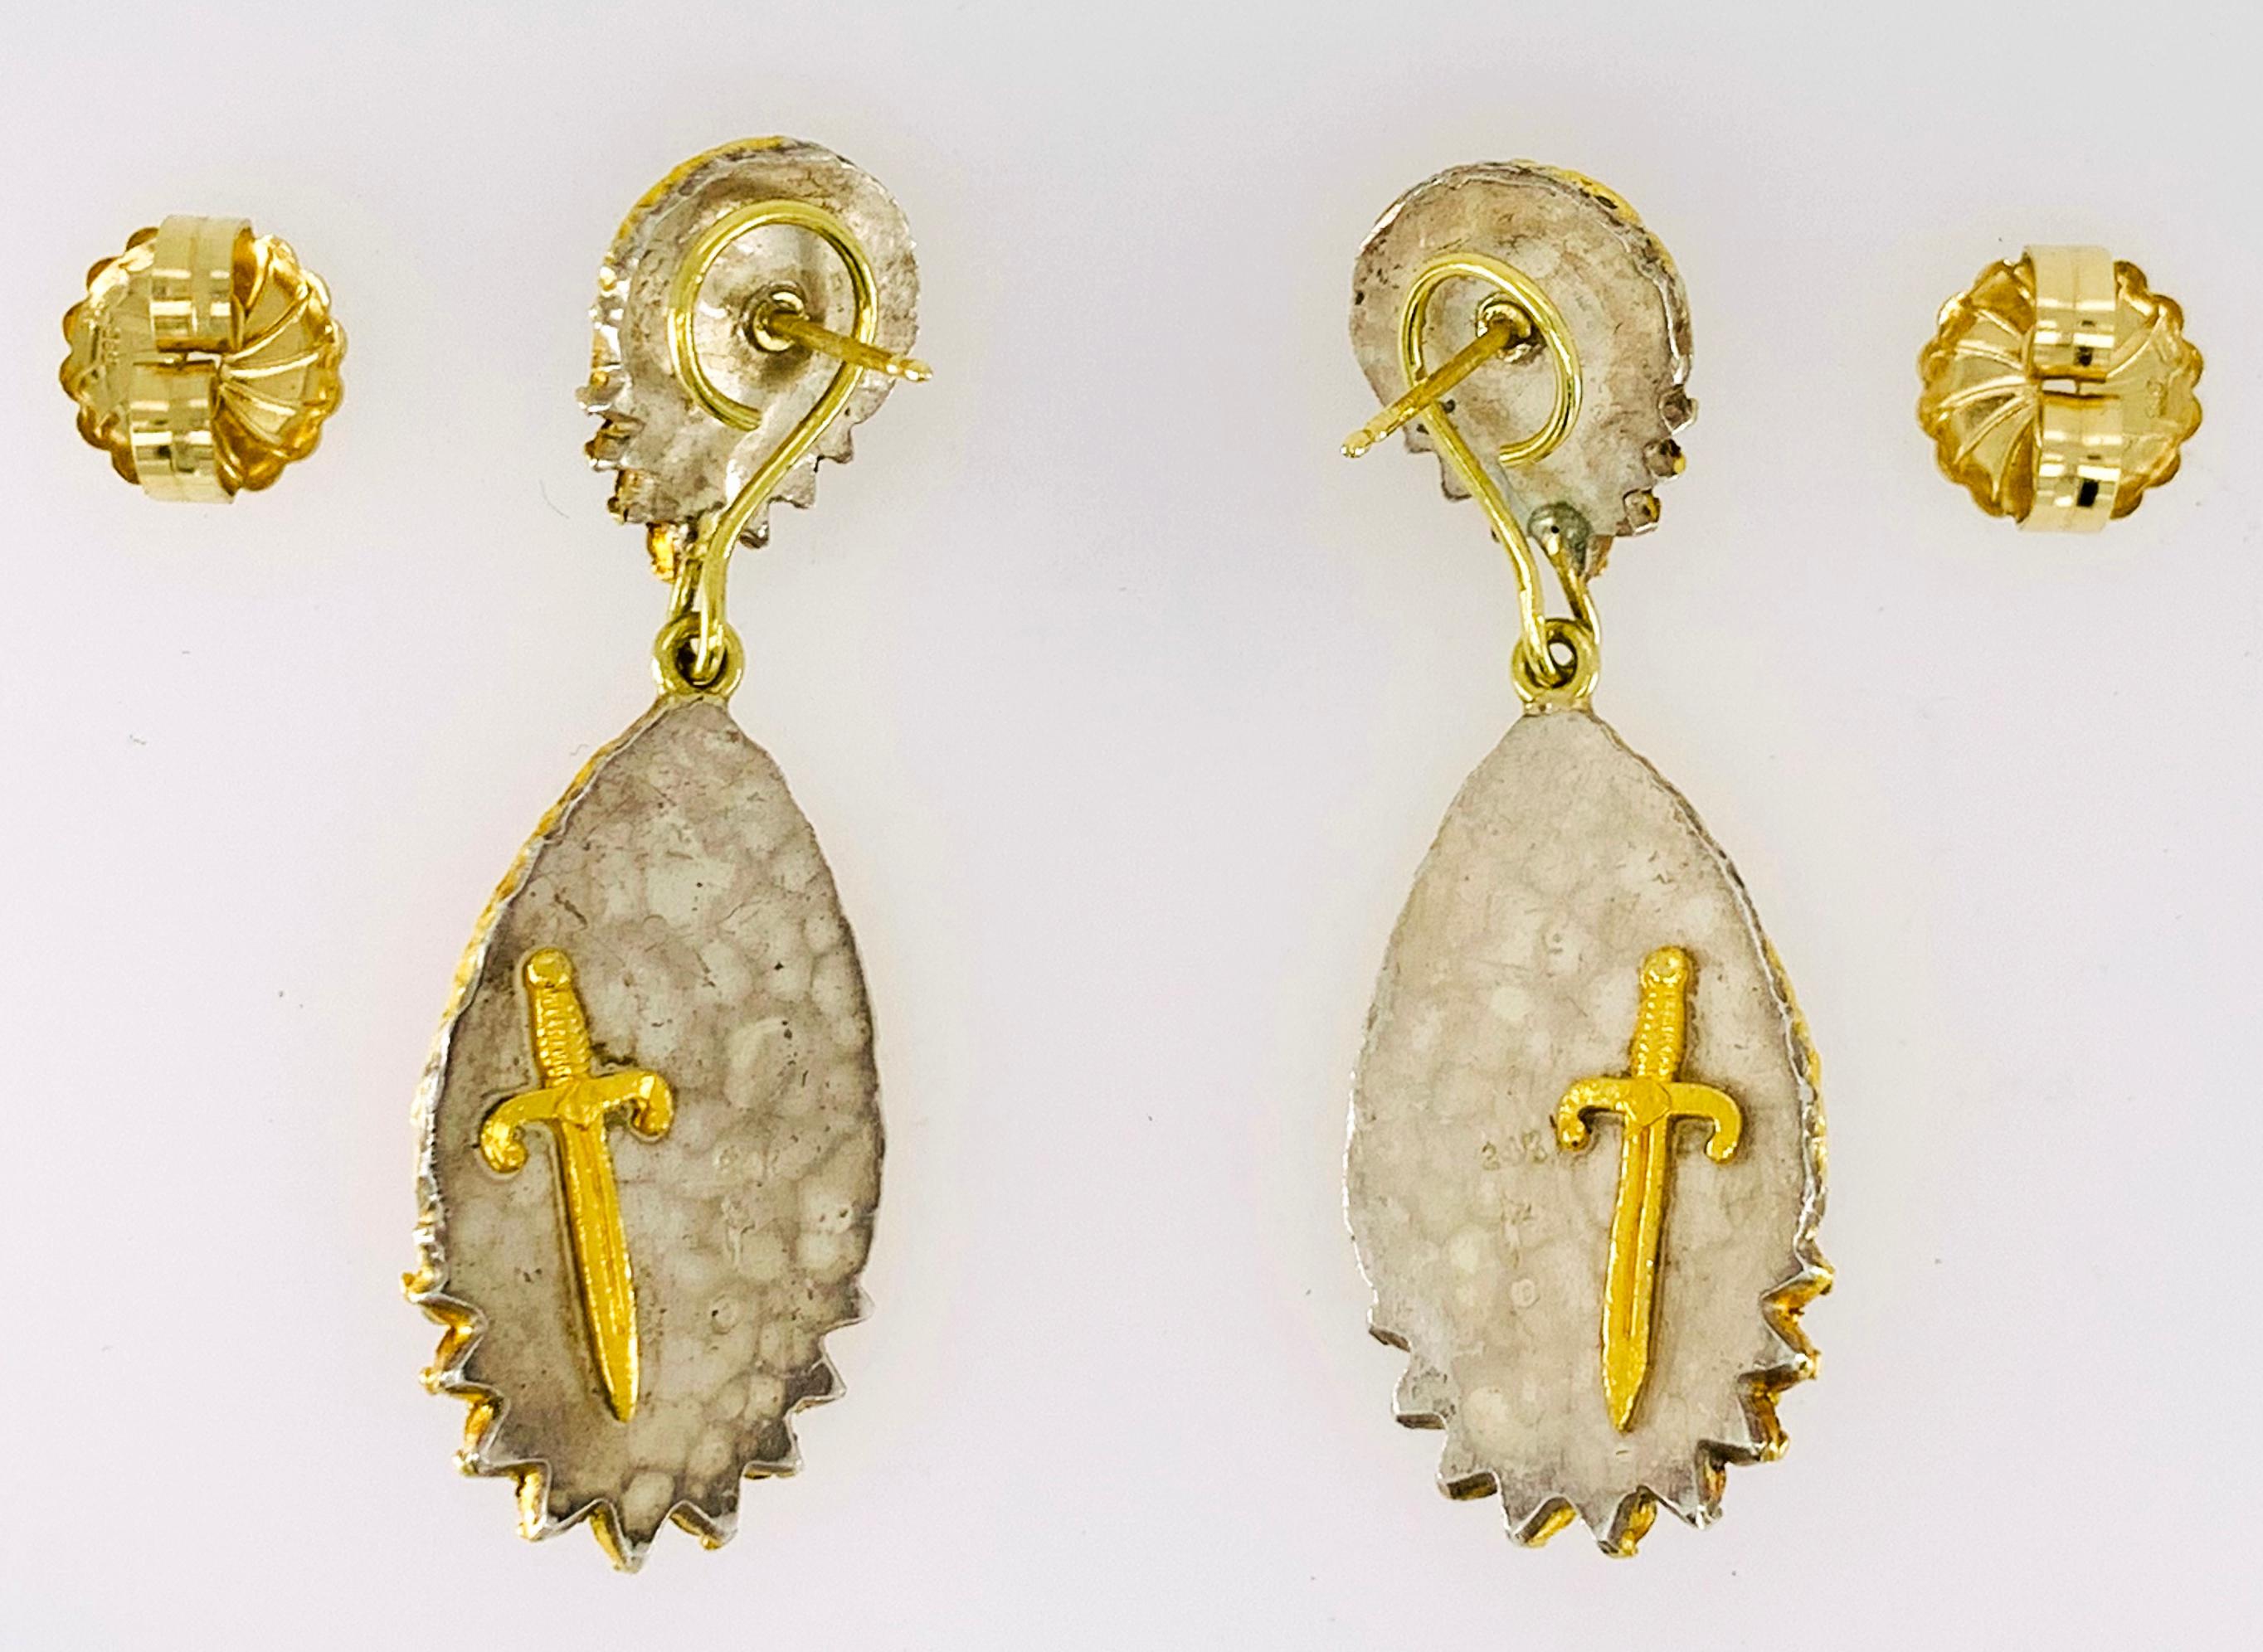 These earrings were designed and made by well known designer Victor Velyan.  They feature 2 pear shaped, faceted Fire Opals weighing 7.55 carats, 2 pear shaped, faceted Spessartites (a special Garnet) weighing 4.66 carats and round brilliant cut